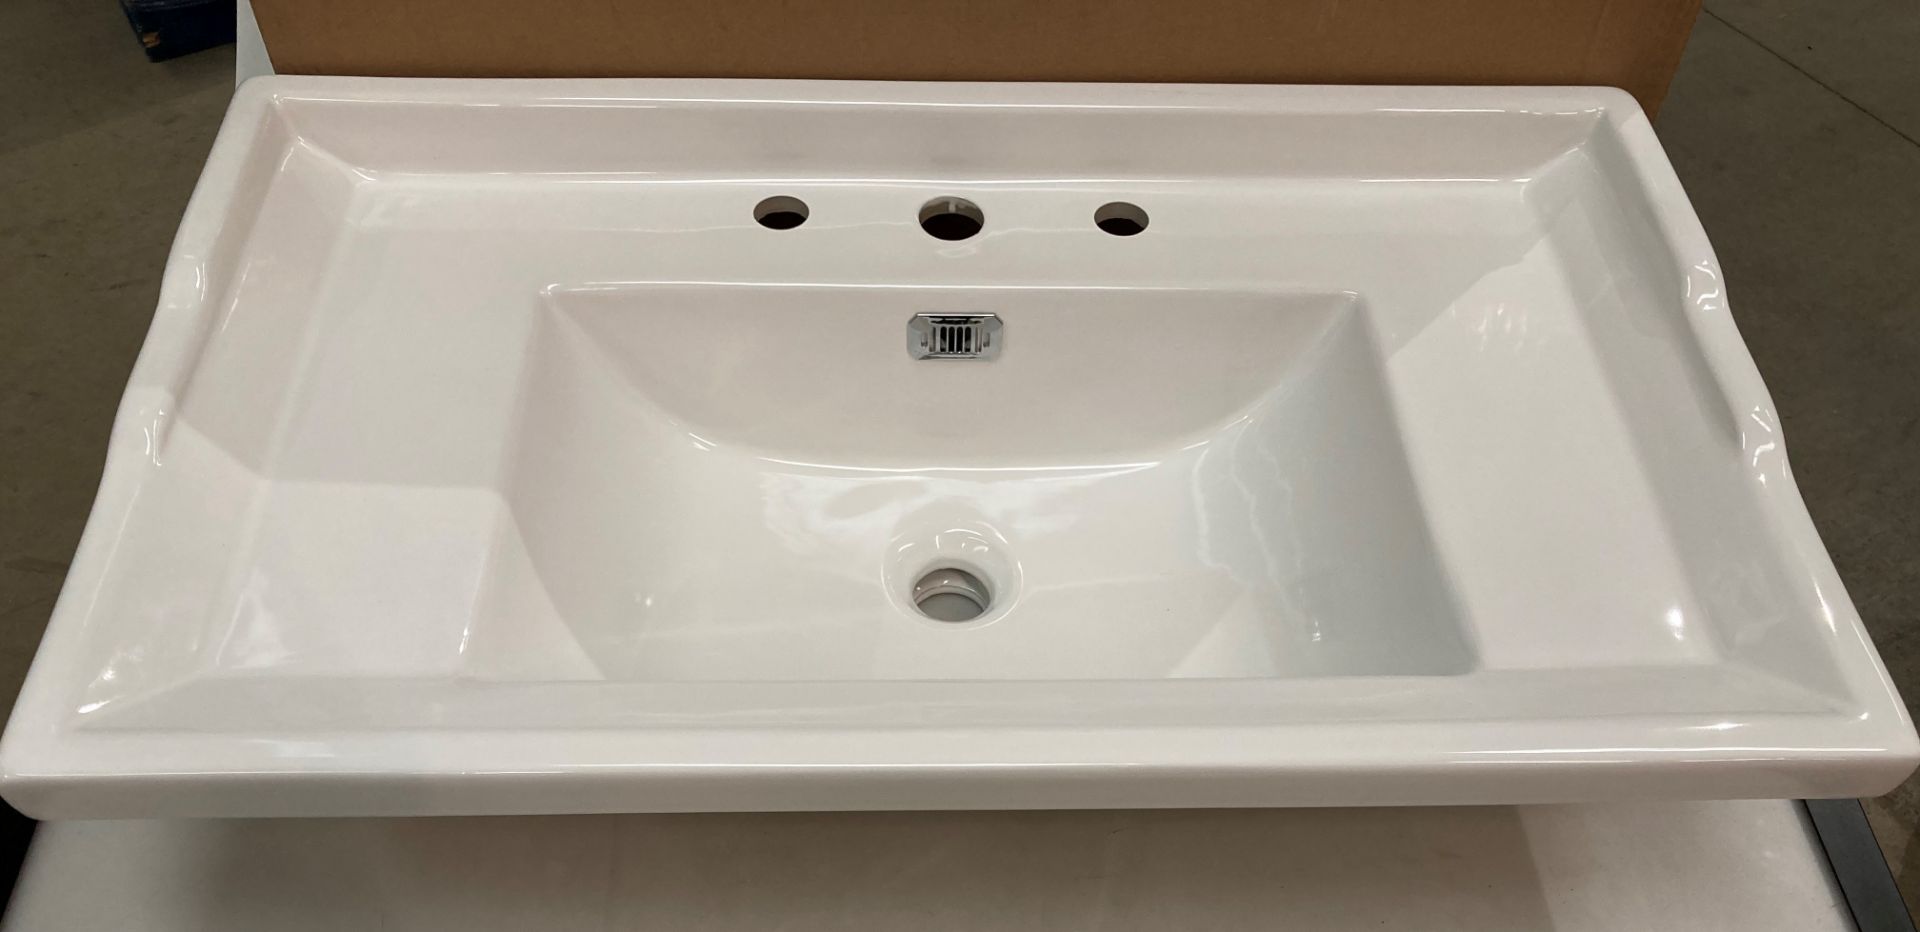 2 x 800mm traditional basin 3T/H size 820mm x 480mm x 220mm